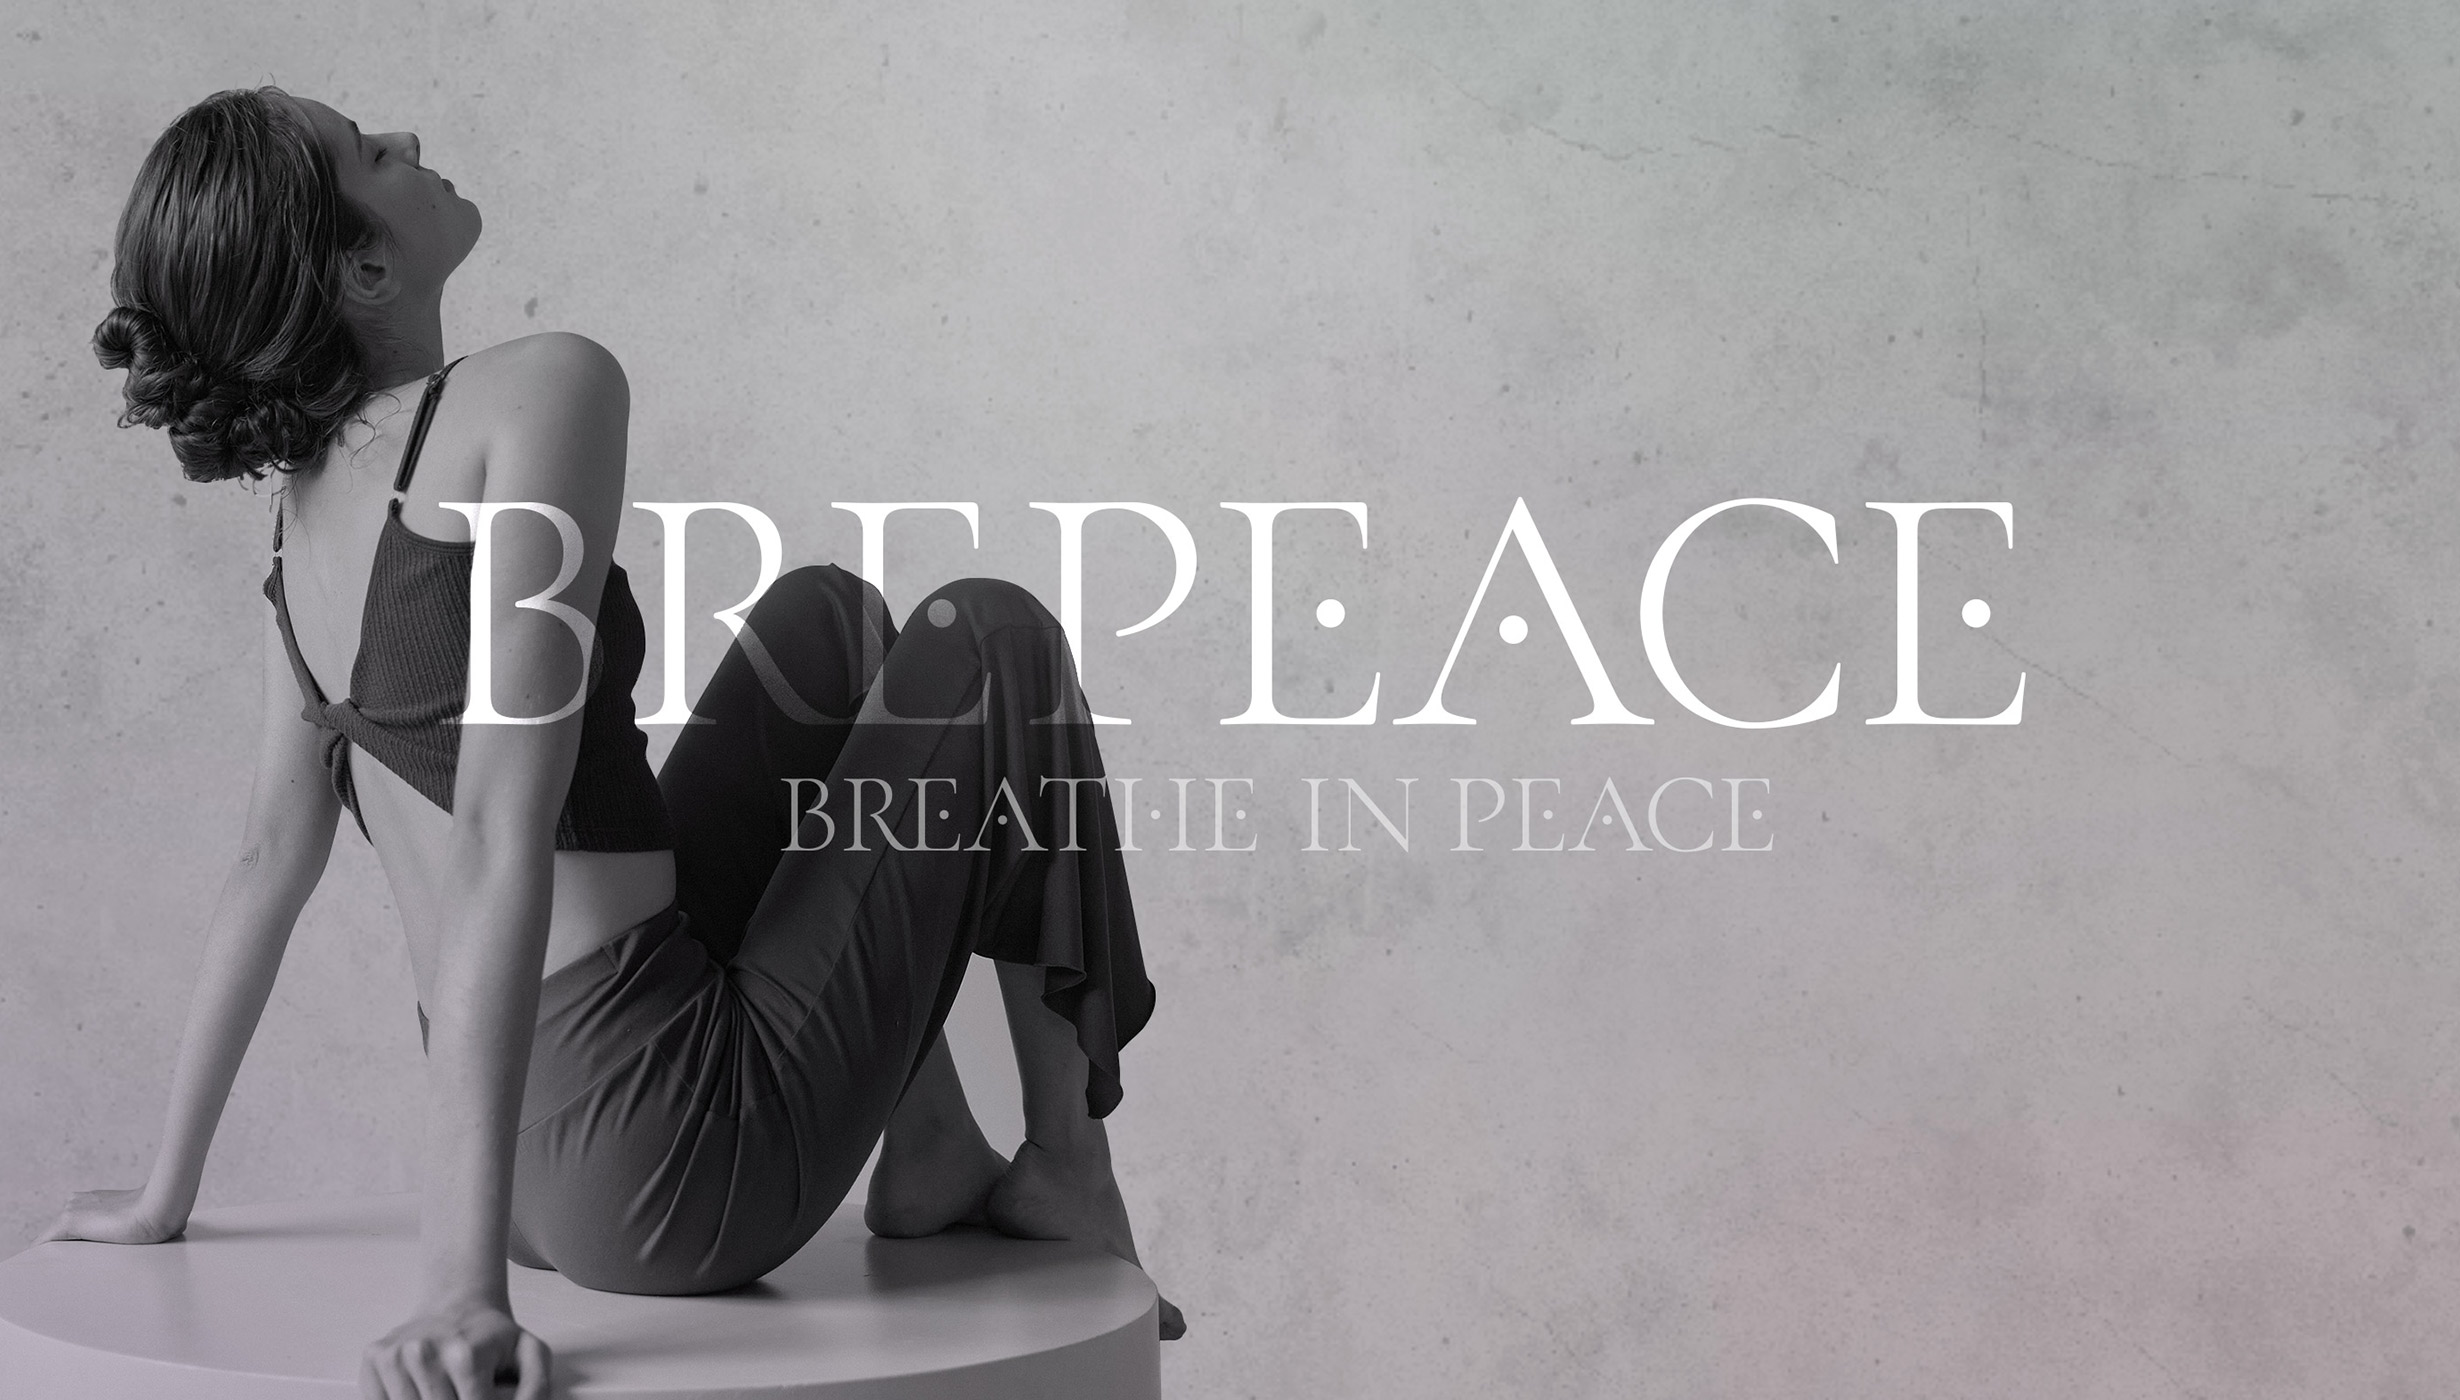 about brepeace